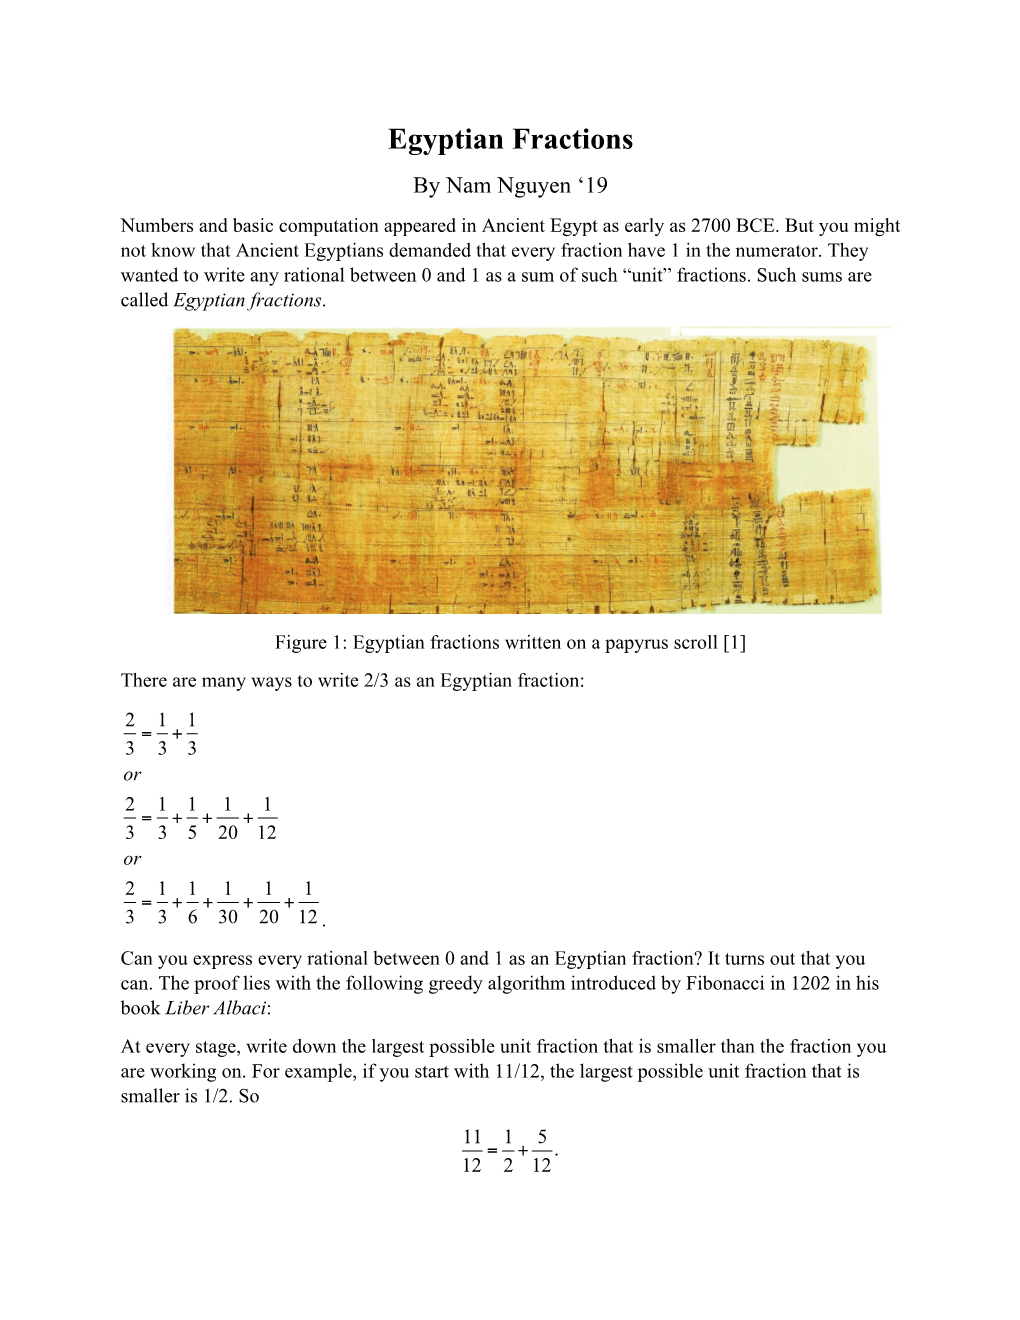 Egyptian Fractions by Nam Nguyen ‘19 Numbers and Basic Computation Appeared in Ancient Egypt As Early As 2700 BCE